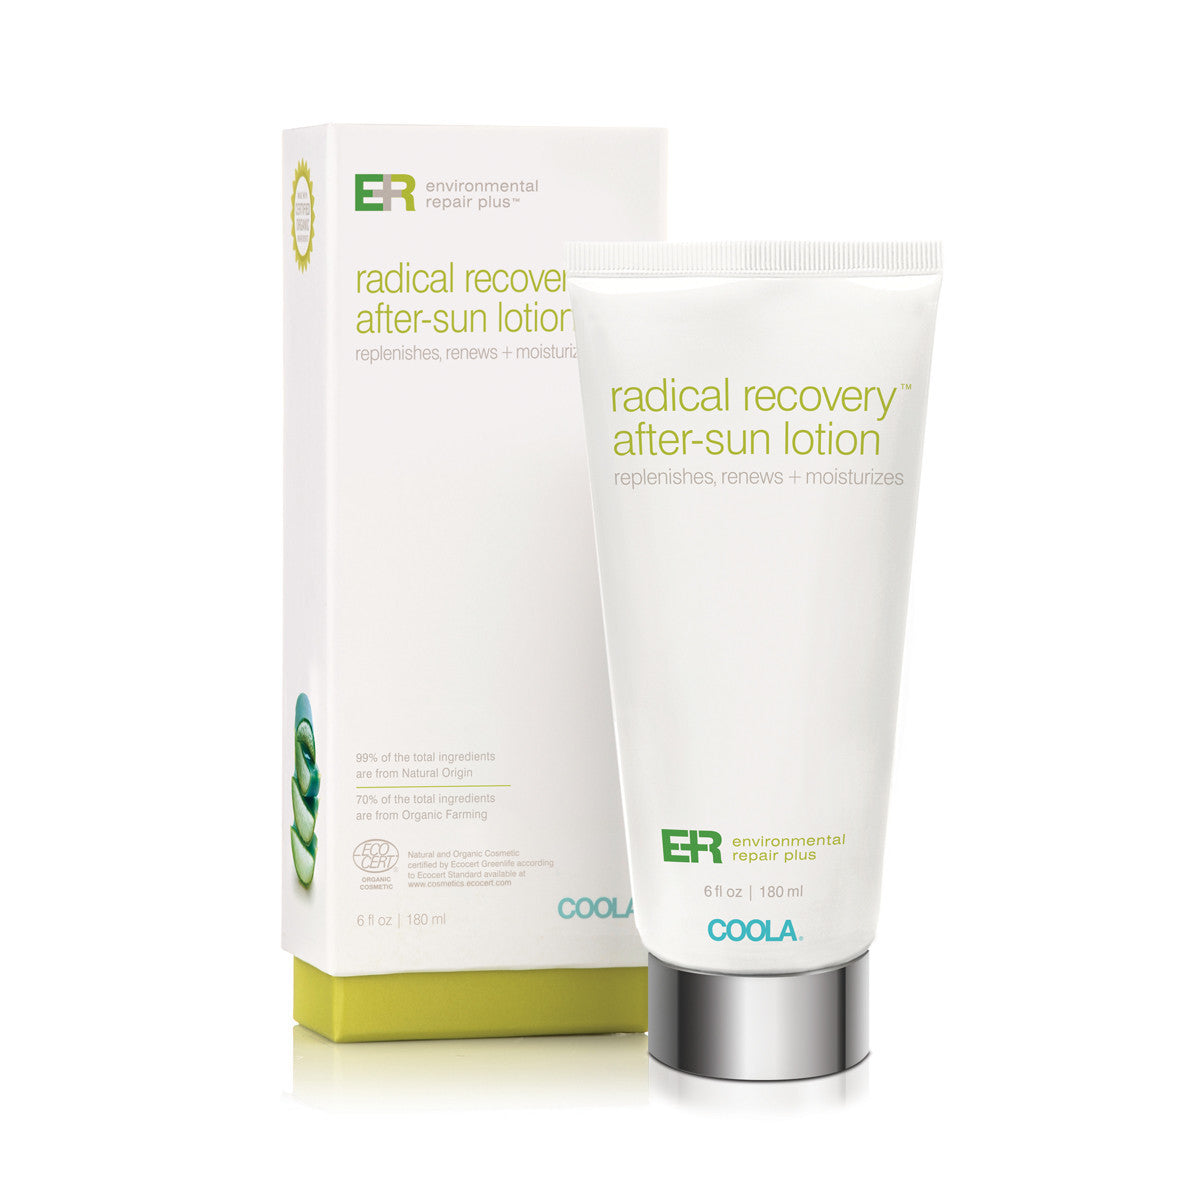 COOLA ENVIRONMENTAL REPAIR PLUS® RADICAL RECOVERY® AFTER-SUN LOTION | New London Pharmacy